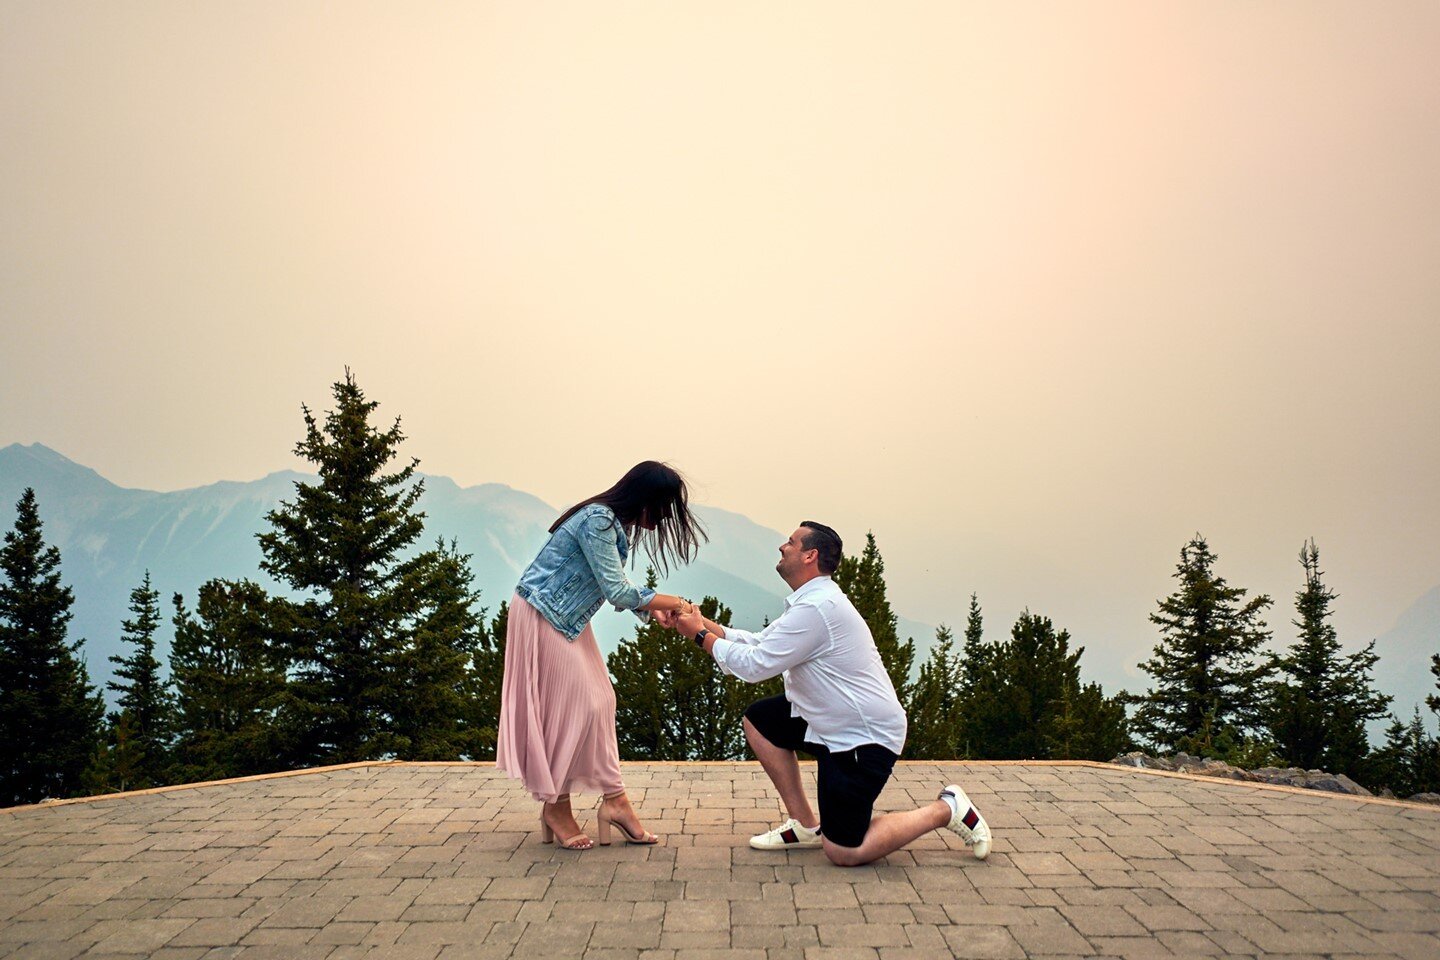 &quot;Are you okay?&quot;⁠
&quot;I'm shaking!&quot;⁠
⁠
Congrats Chris &amp; Maria! 🎉⁠
⁠
Shoutout to the amazing staff at @BanffGondola for helping to plan the sneakiest surprise proposal 😍⁠
⁠
⁠
#BanffNationalPark #BanffProposal #BanffWedding #Banff